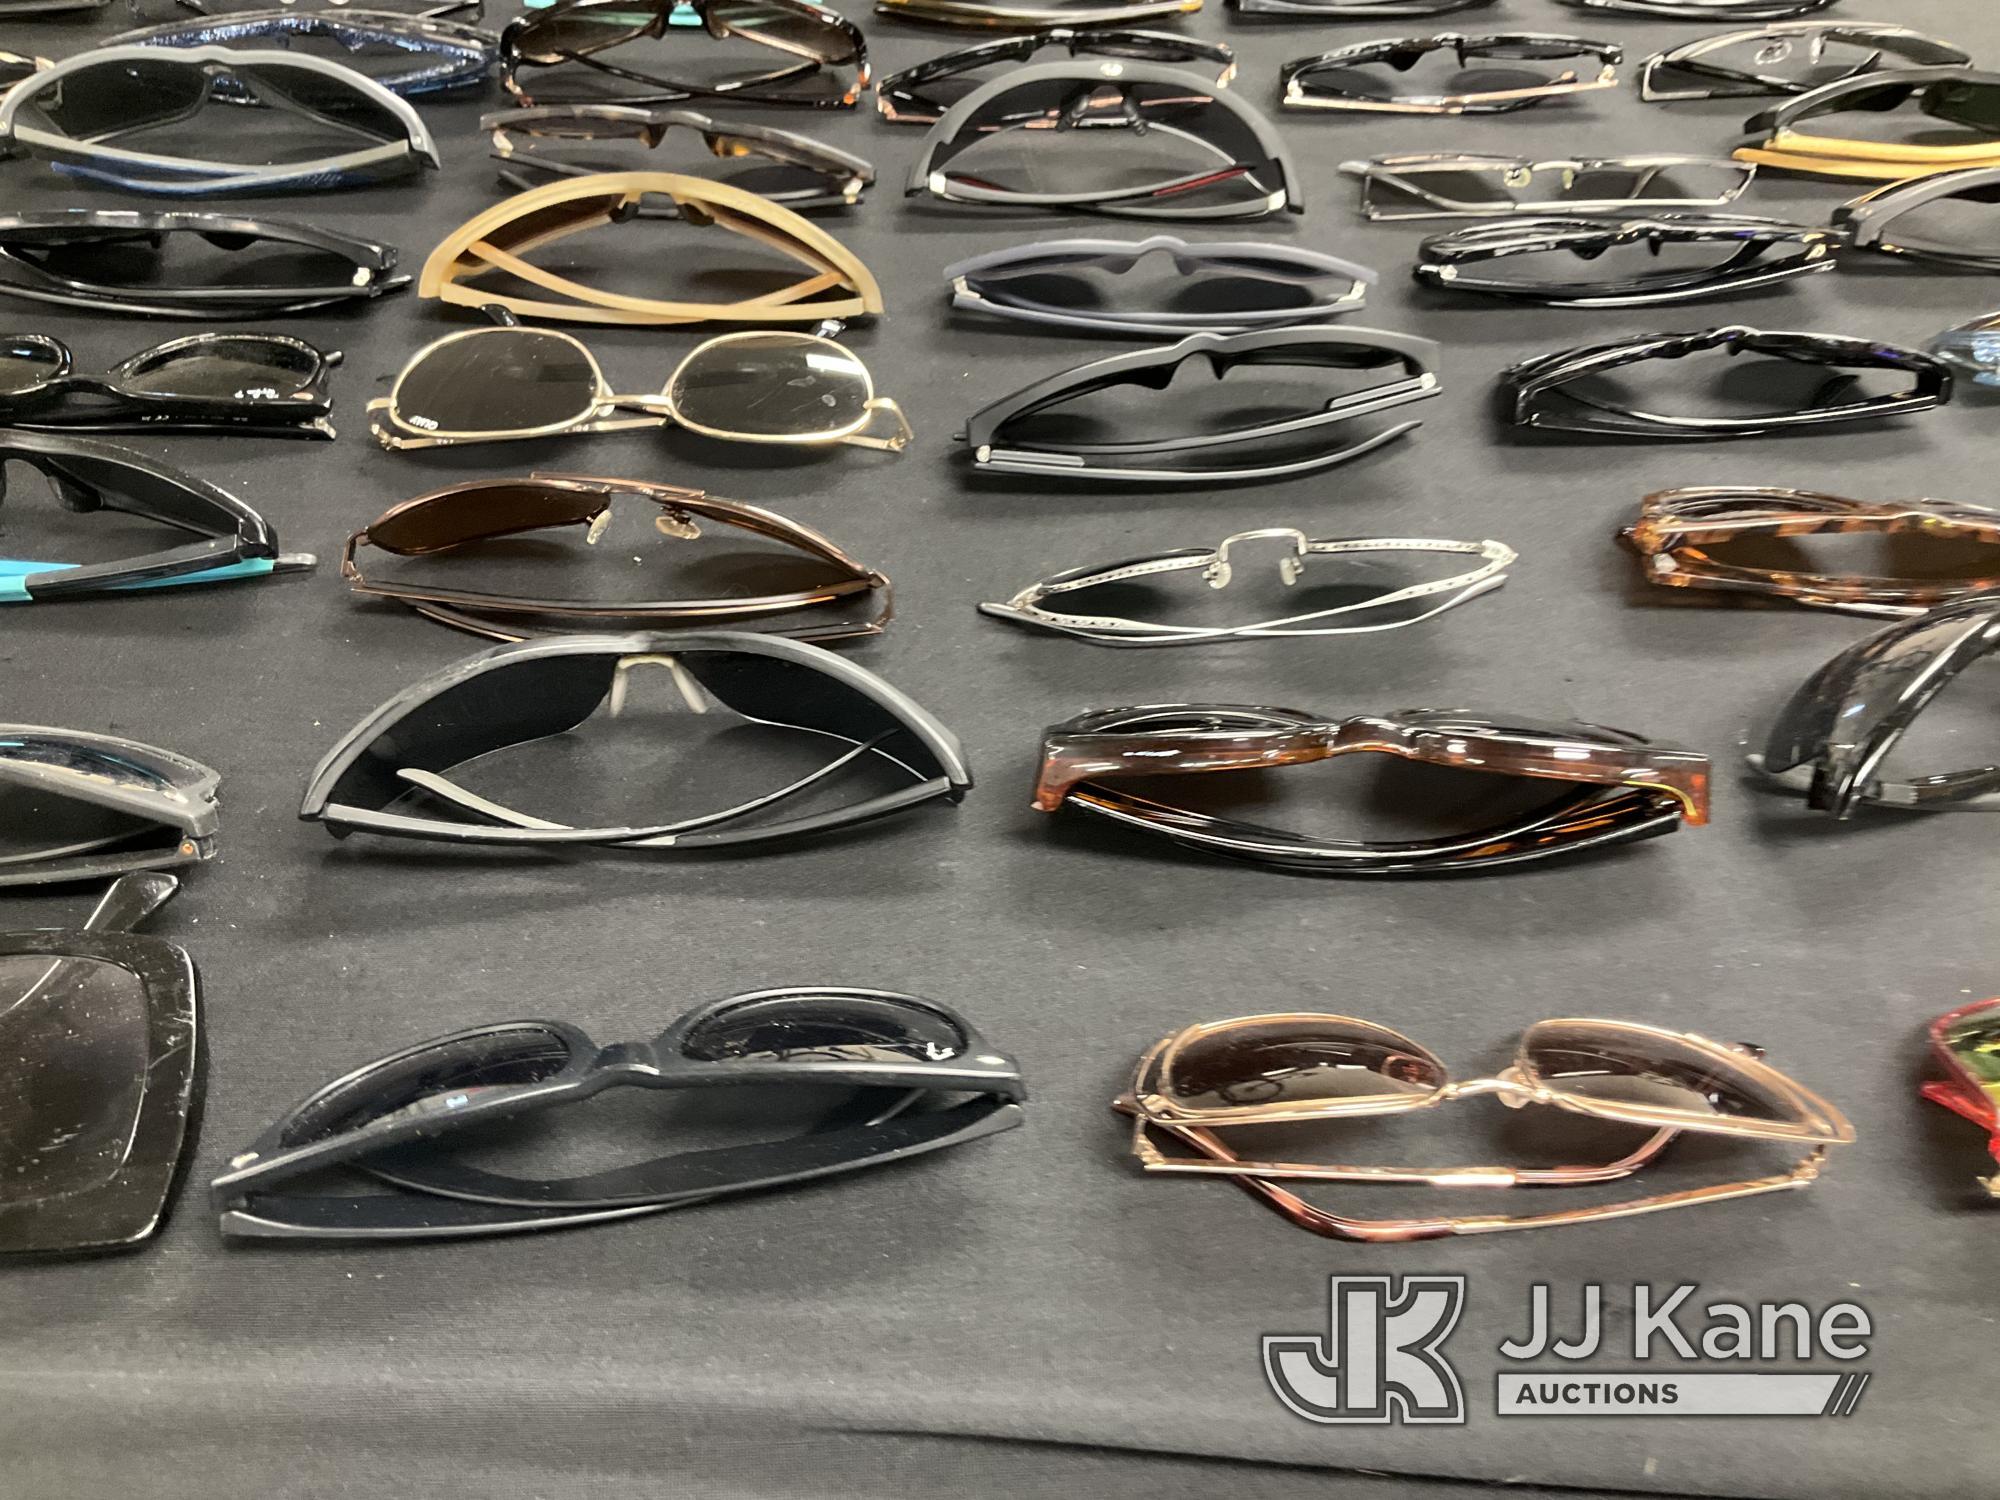 (Jurupa Valley, CA) Sunglasses (Used) NOTE: This unit is being sold AS IS/WHERE IS via Timed Auction